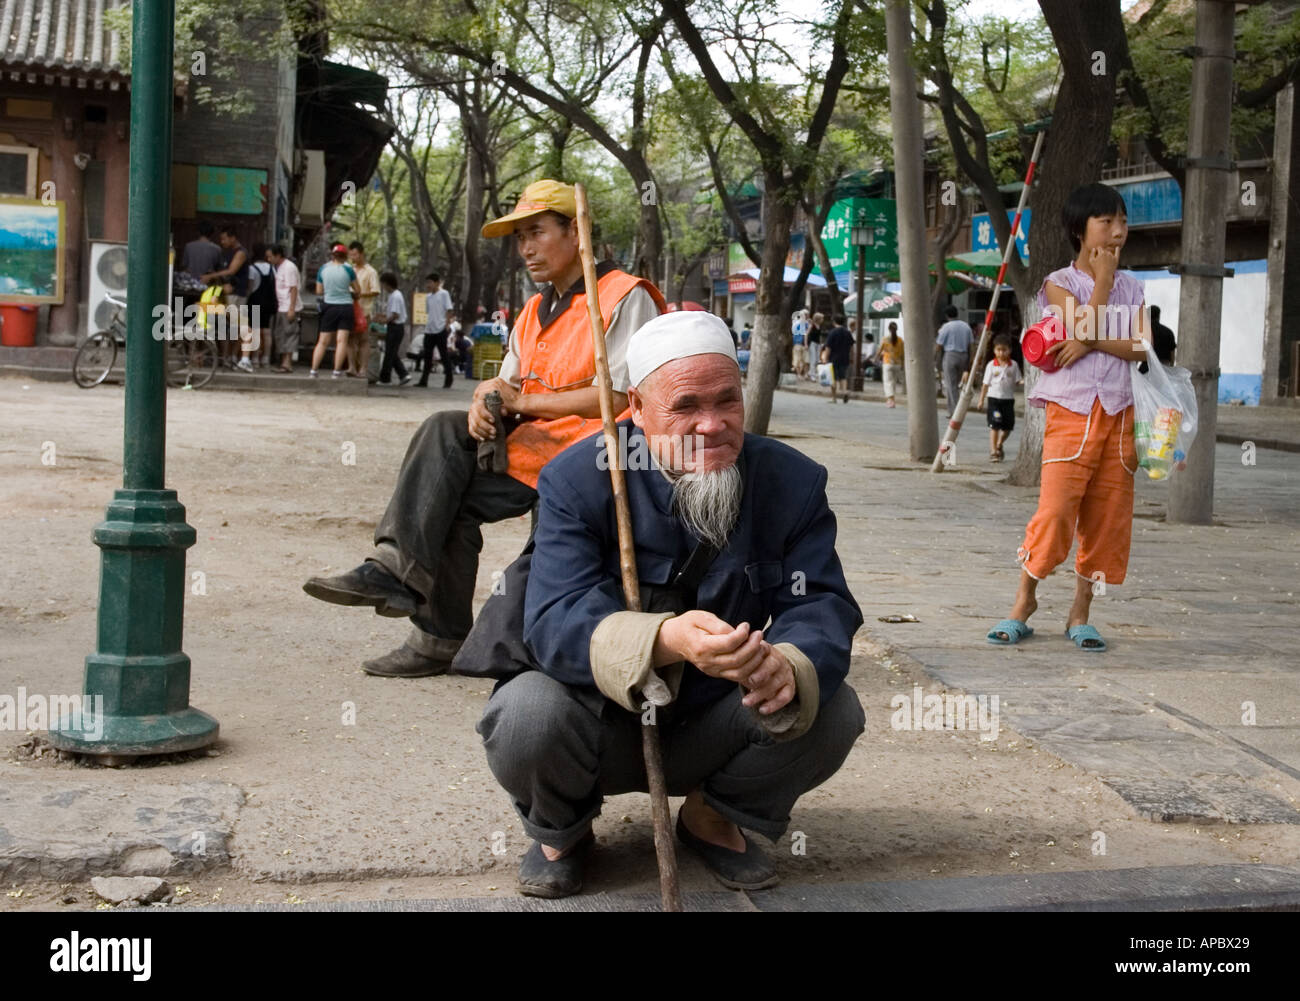 Local old man resting in squatting position in a street, Xi'an, China Stock Photo